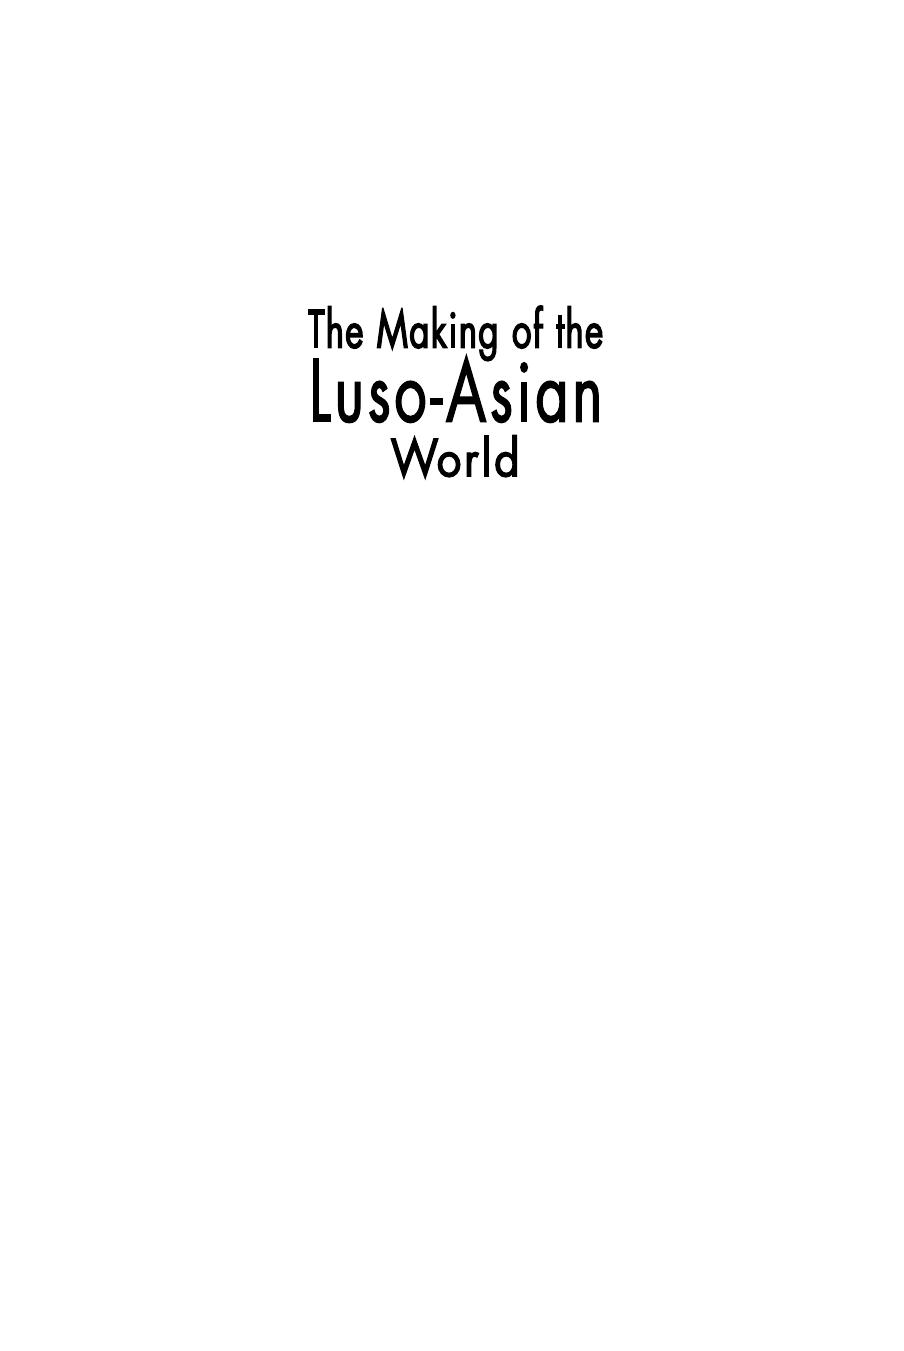 Portuguese and Luso-Asian Legacies in Southeast Asia, 1511-2011, vol. 1: The Making of the Luso-Asian World: Intricacies of Engagement by Laura Jarnagin (editor)